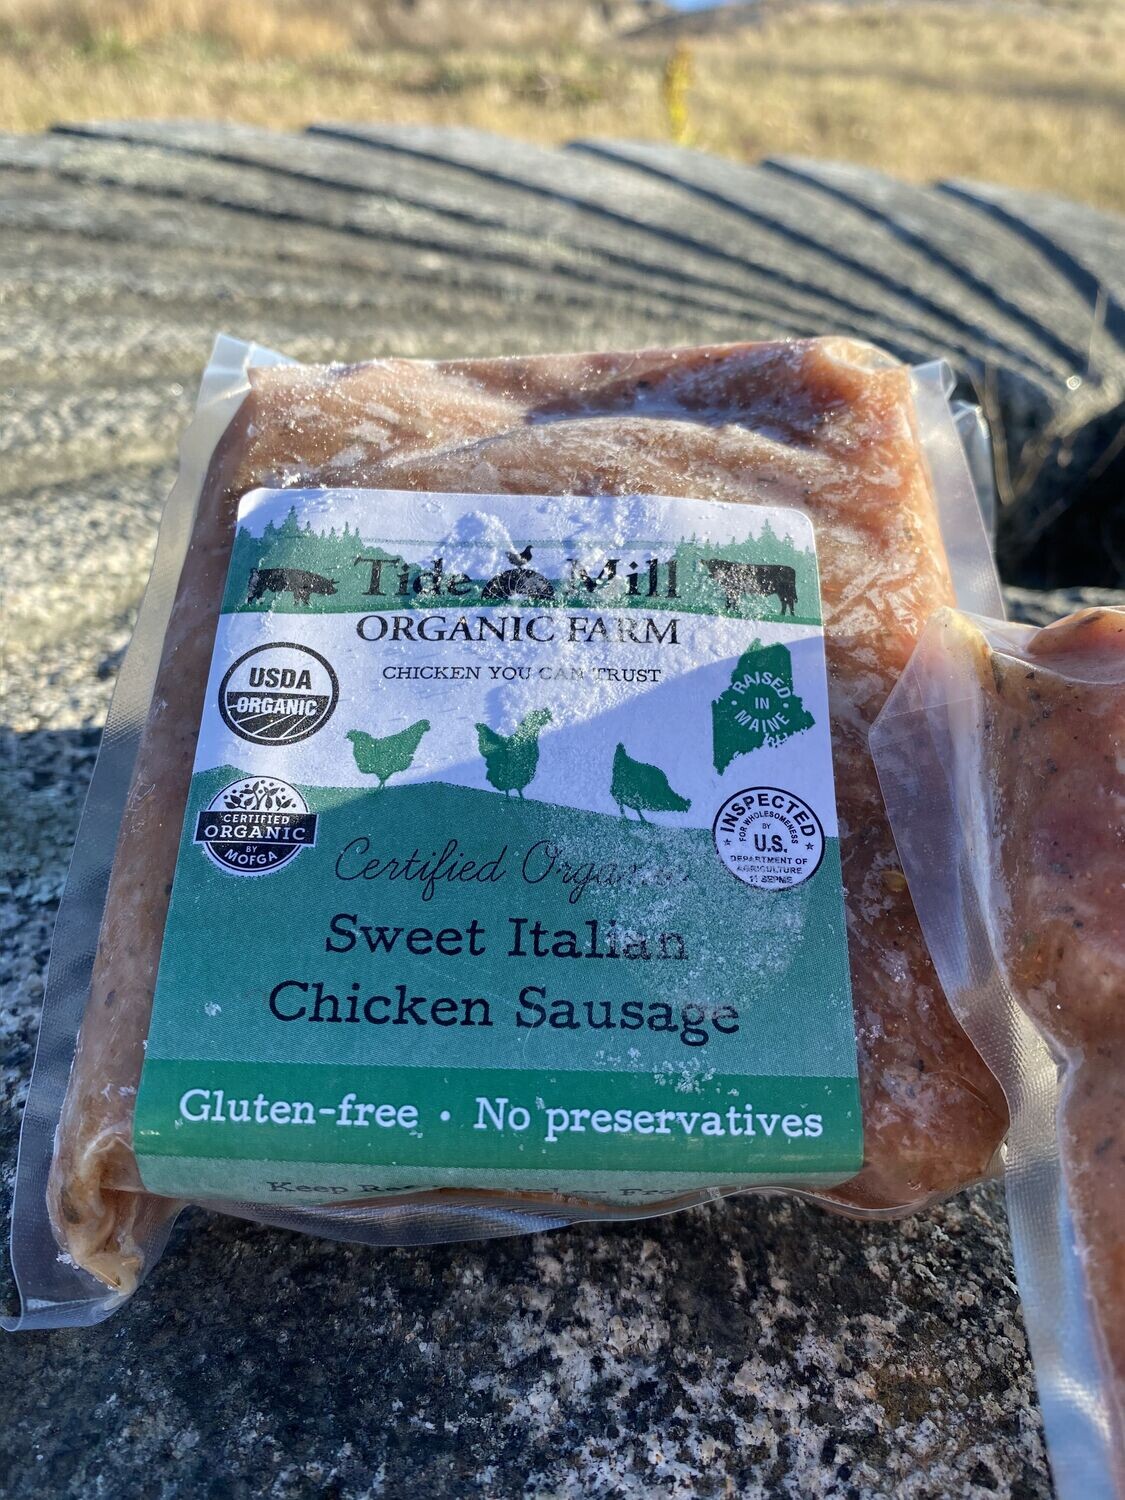 A package of organic sweet italian chicken loose sausage